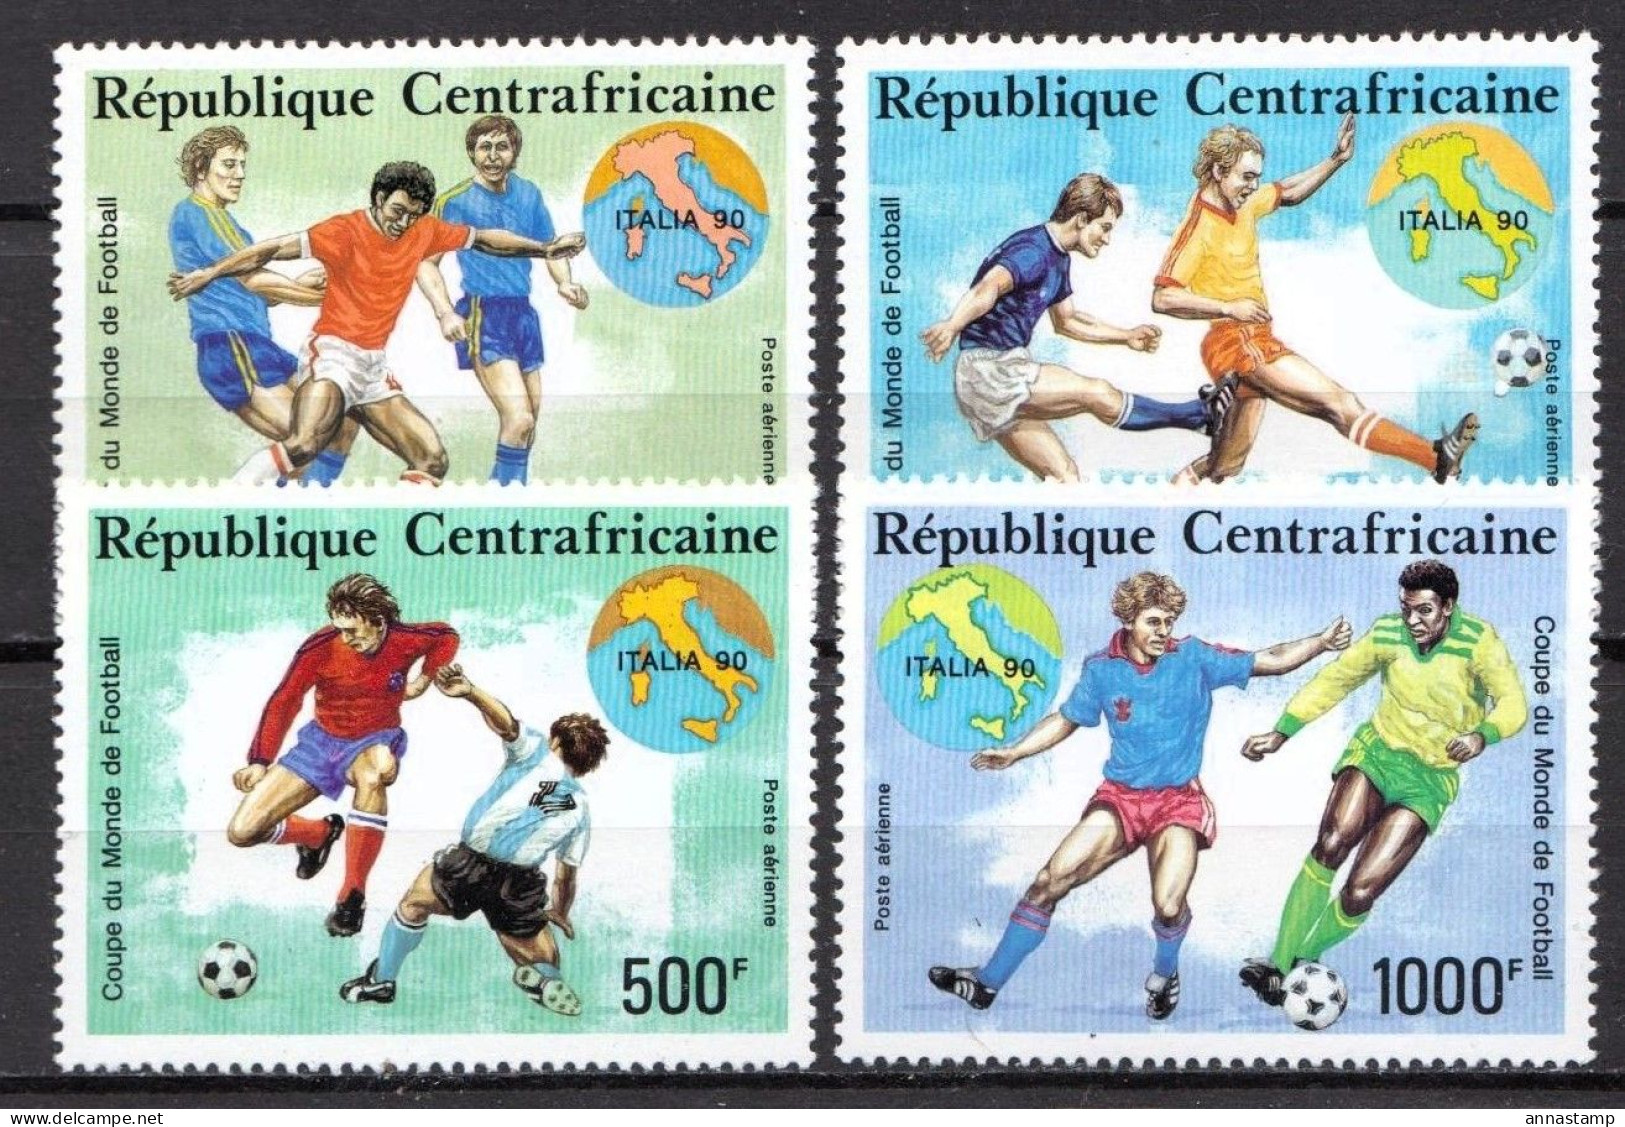 Central Africa MNH Set - 1990 – Italy